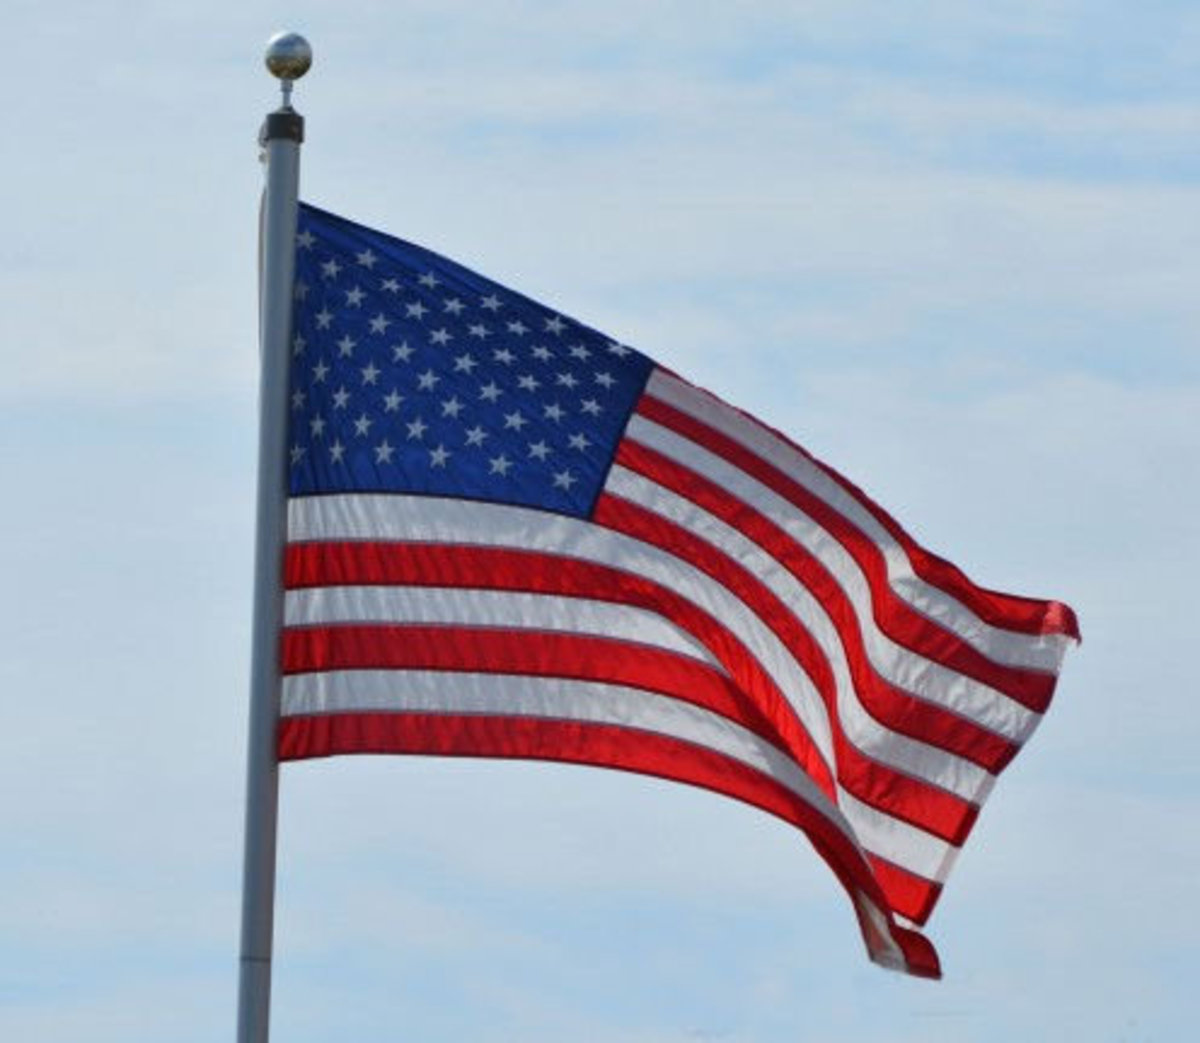 Laws and Guidelines for Civilians Displaying the American Flag